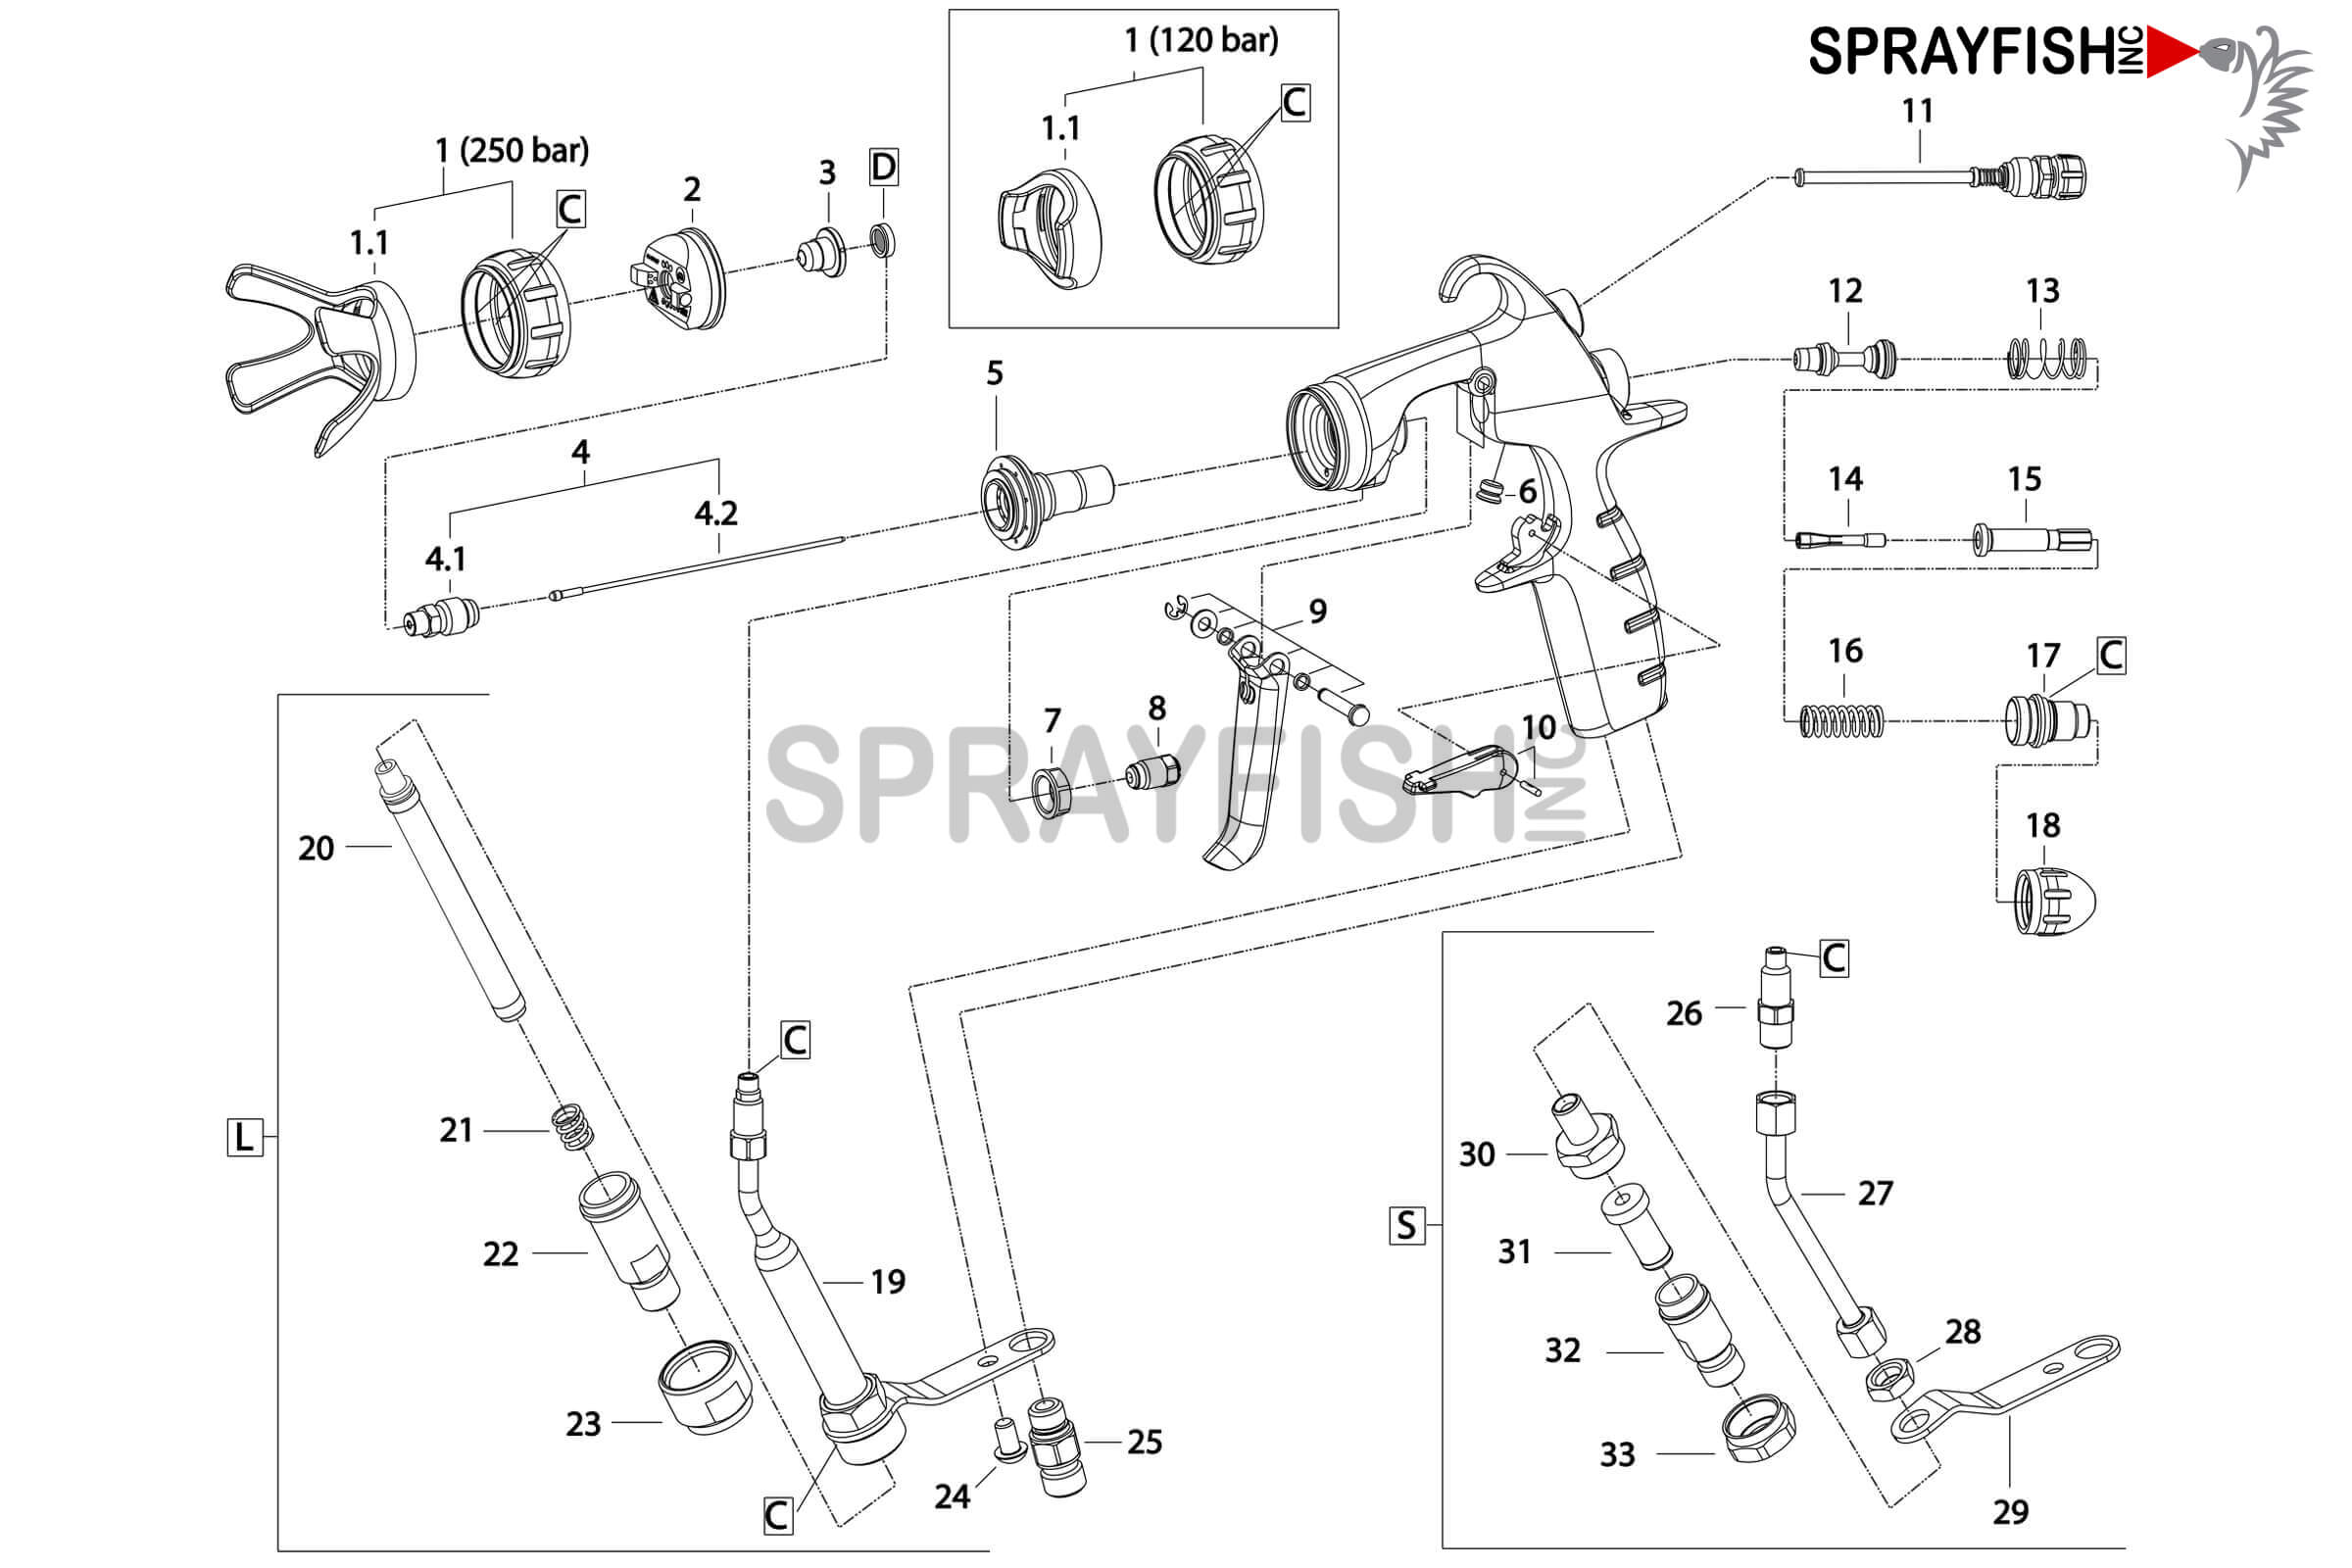 MSGS-200 Air-Assisted Airless Spare Parts Breakdown